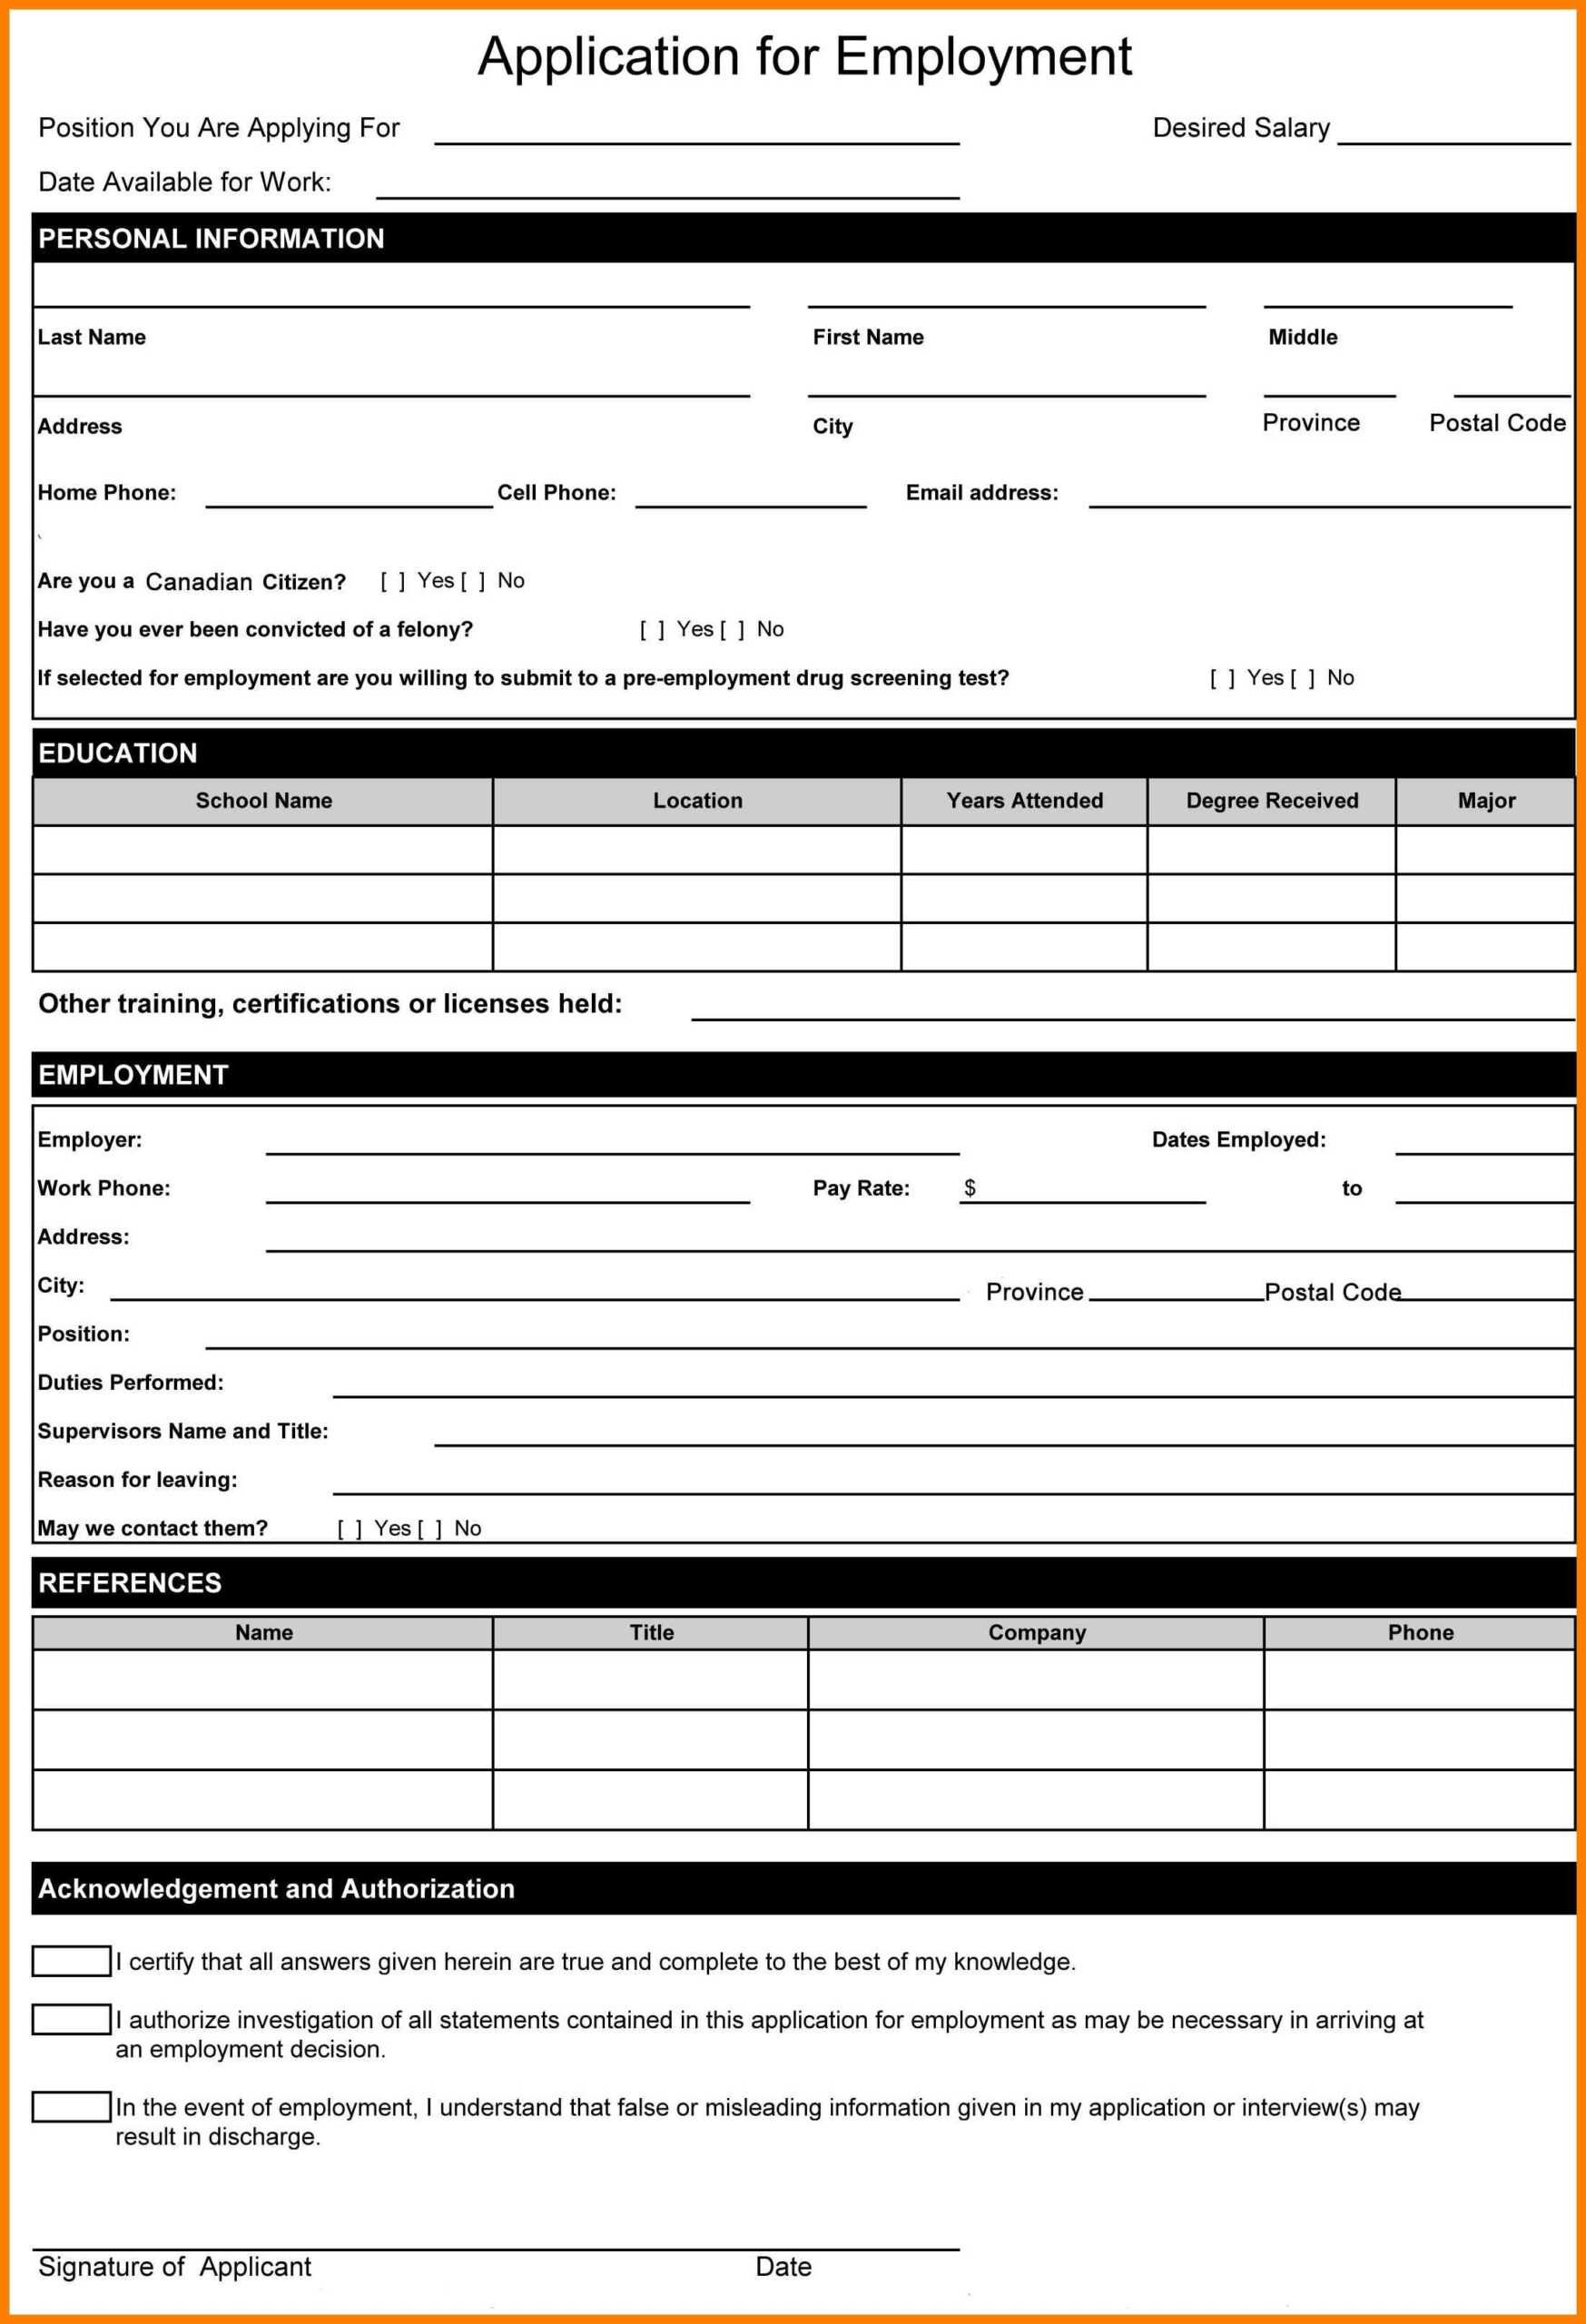 Biodata Sample Form Applicants Forms Templates Word Basic In Job Application Template Word